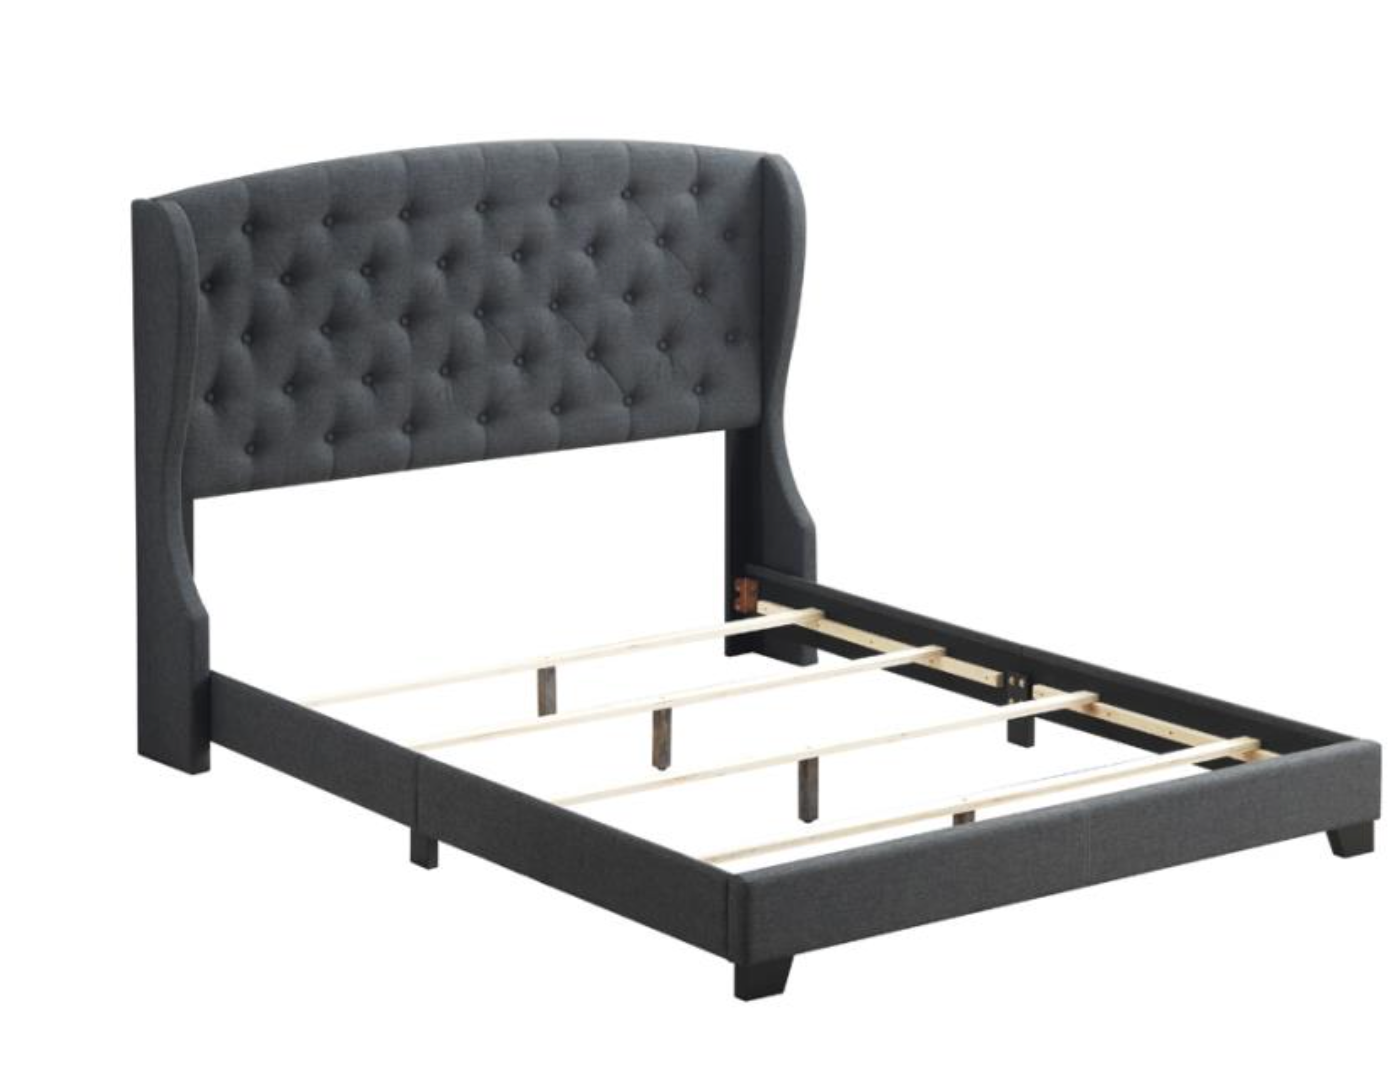 Luxe Demi Wing King Bed - Charcoal